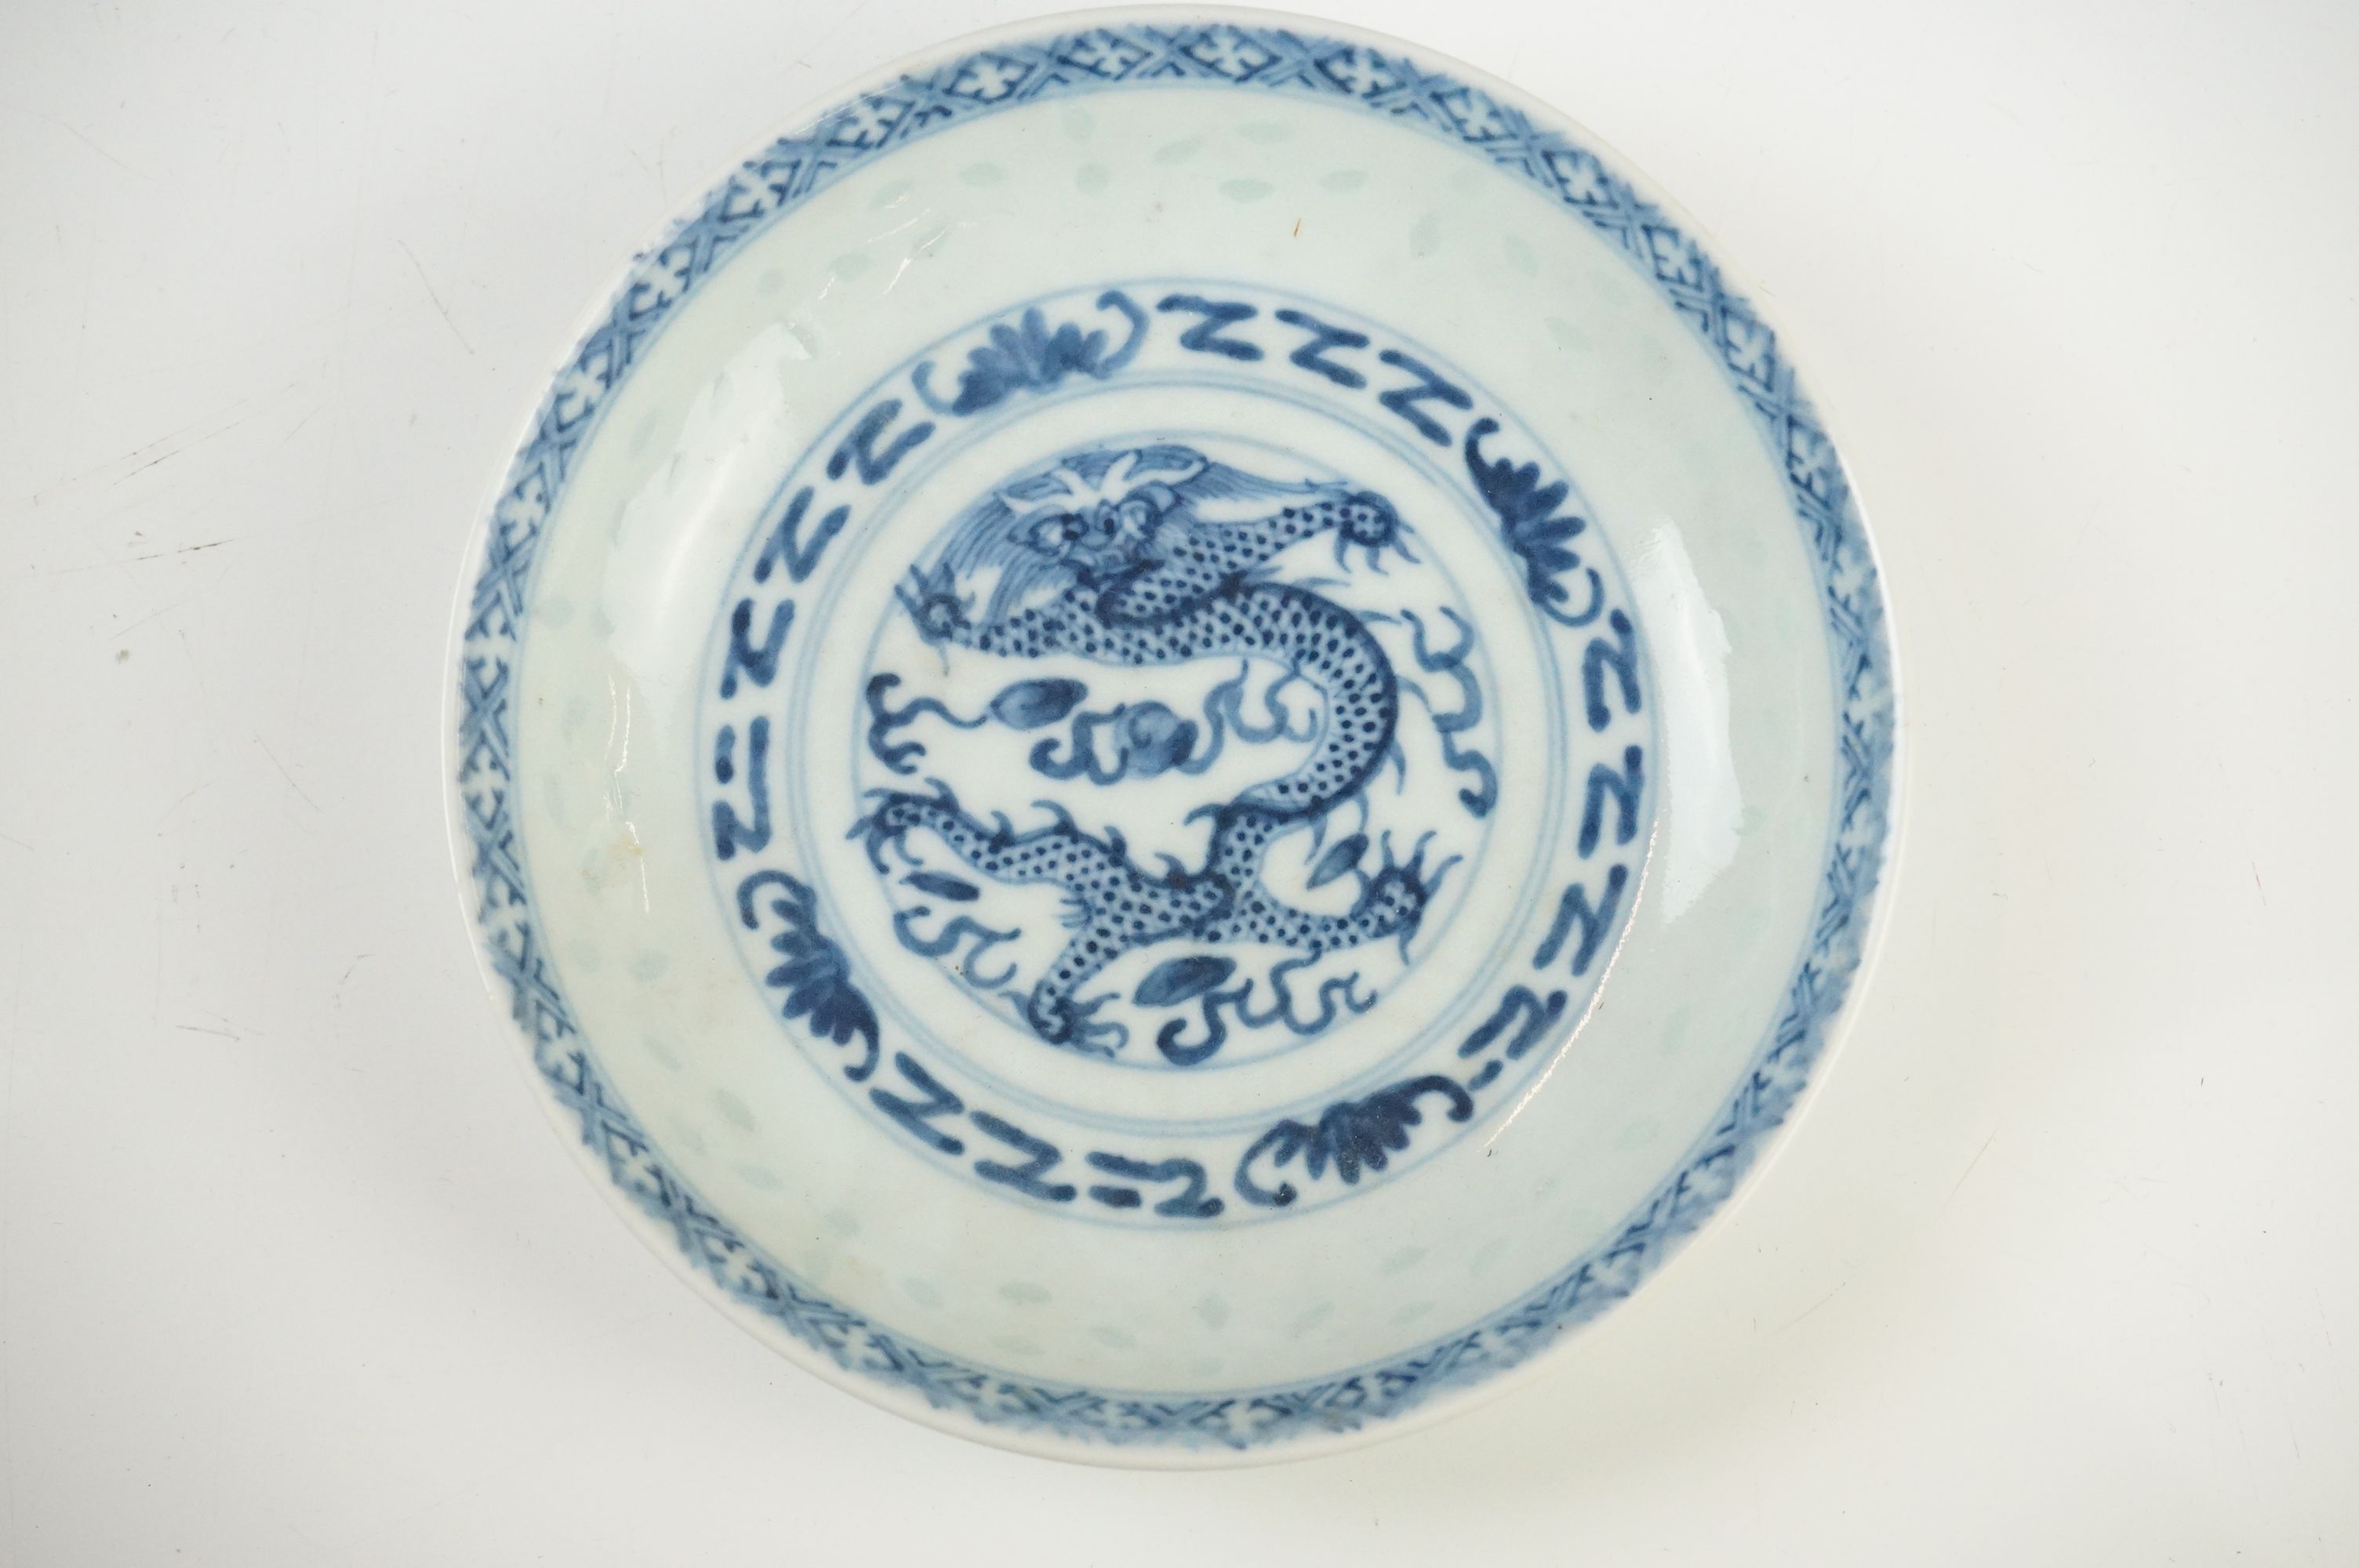 Collection of Chinese Tea Bowls, Cups and Saucers, 18th century onwards, mainly famille rose and - Image 8 of 28